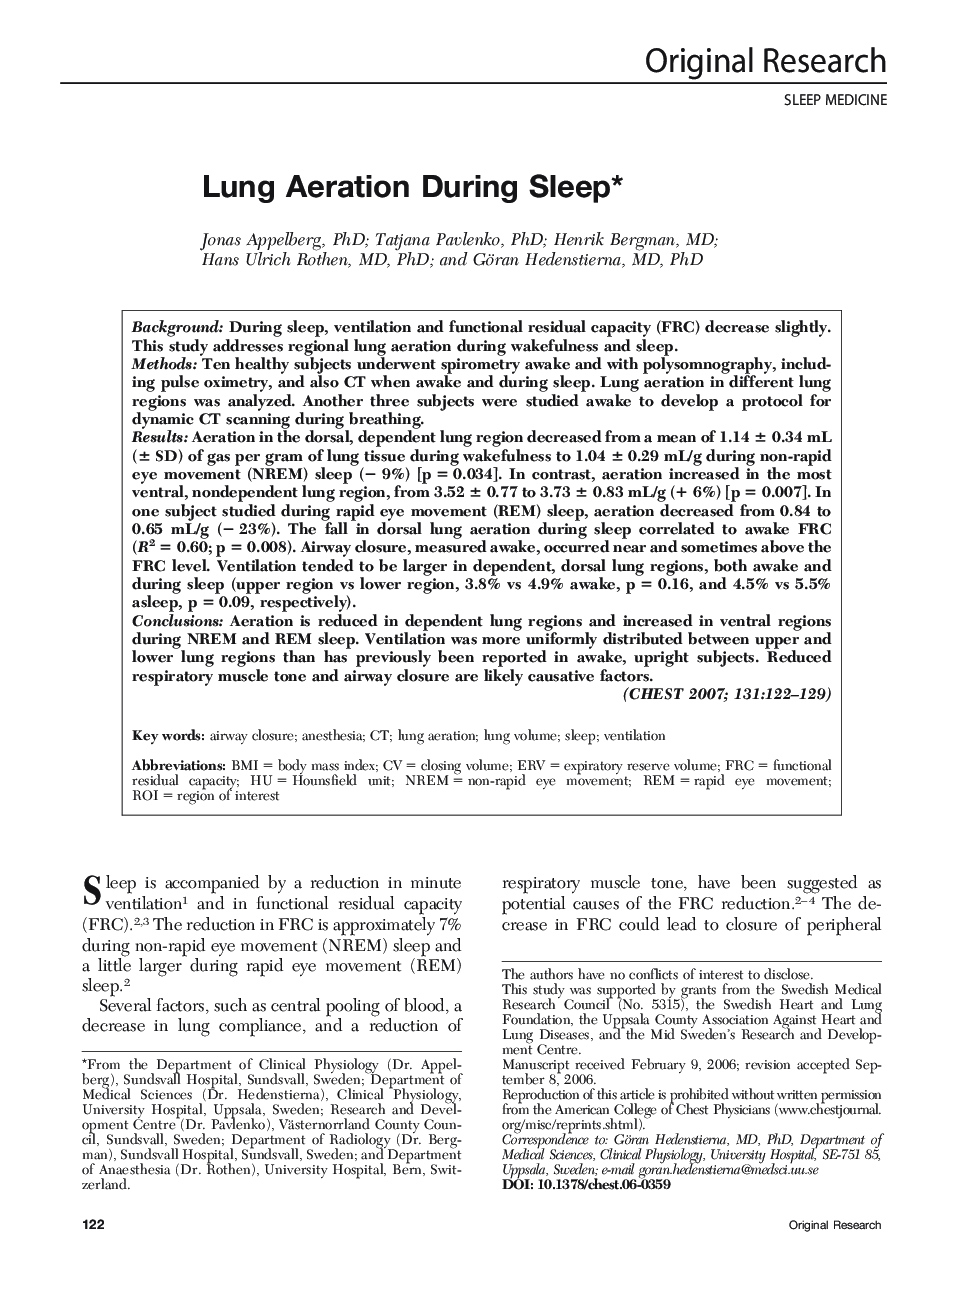 Lung Aeration During Sleep 